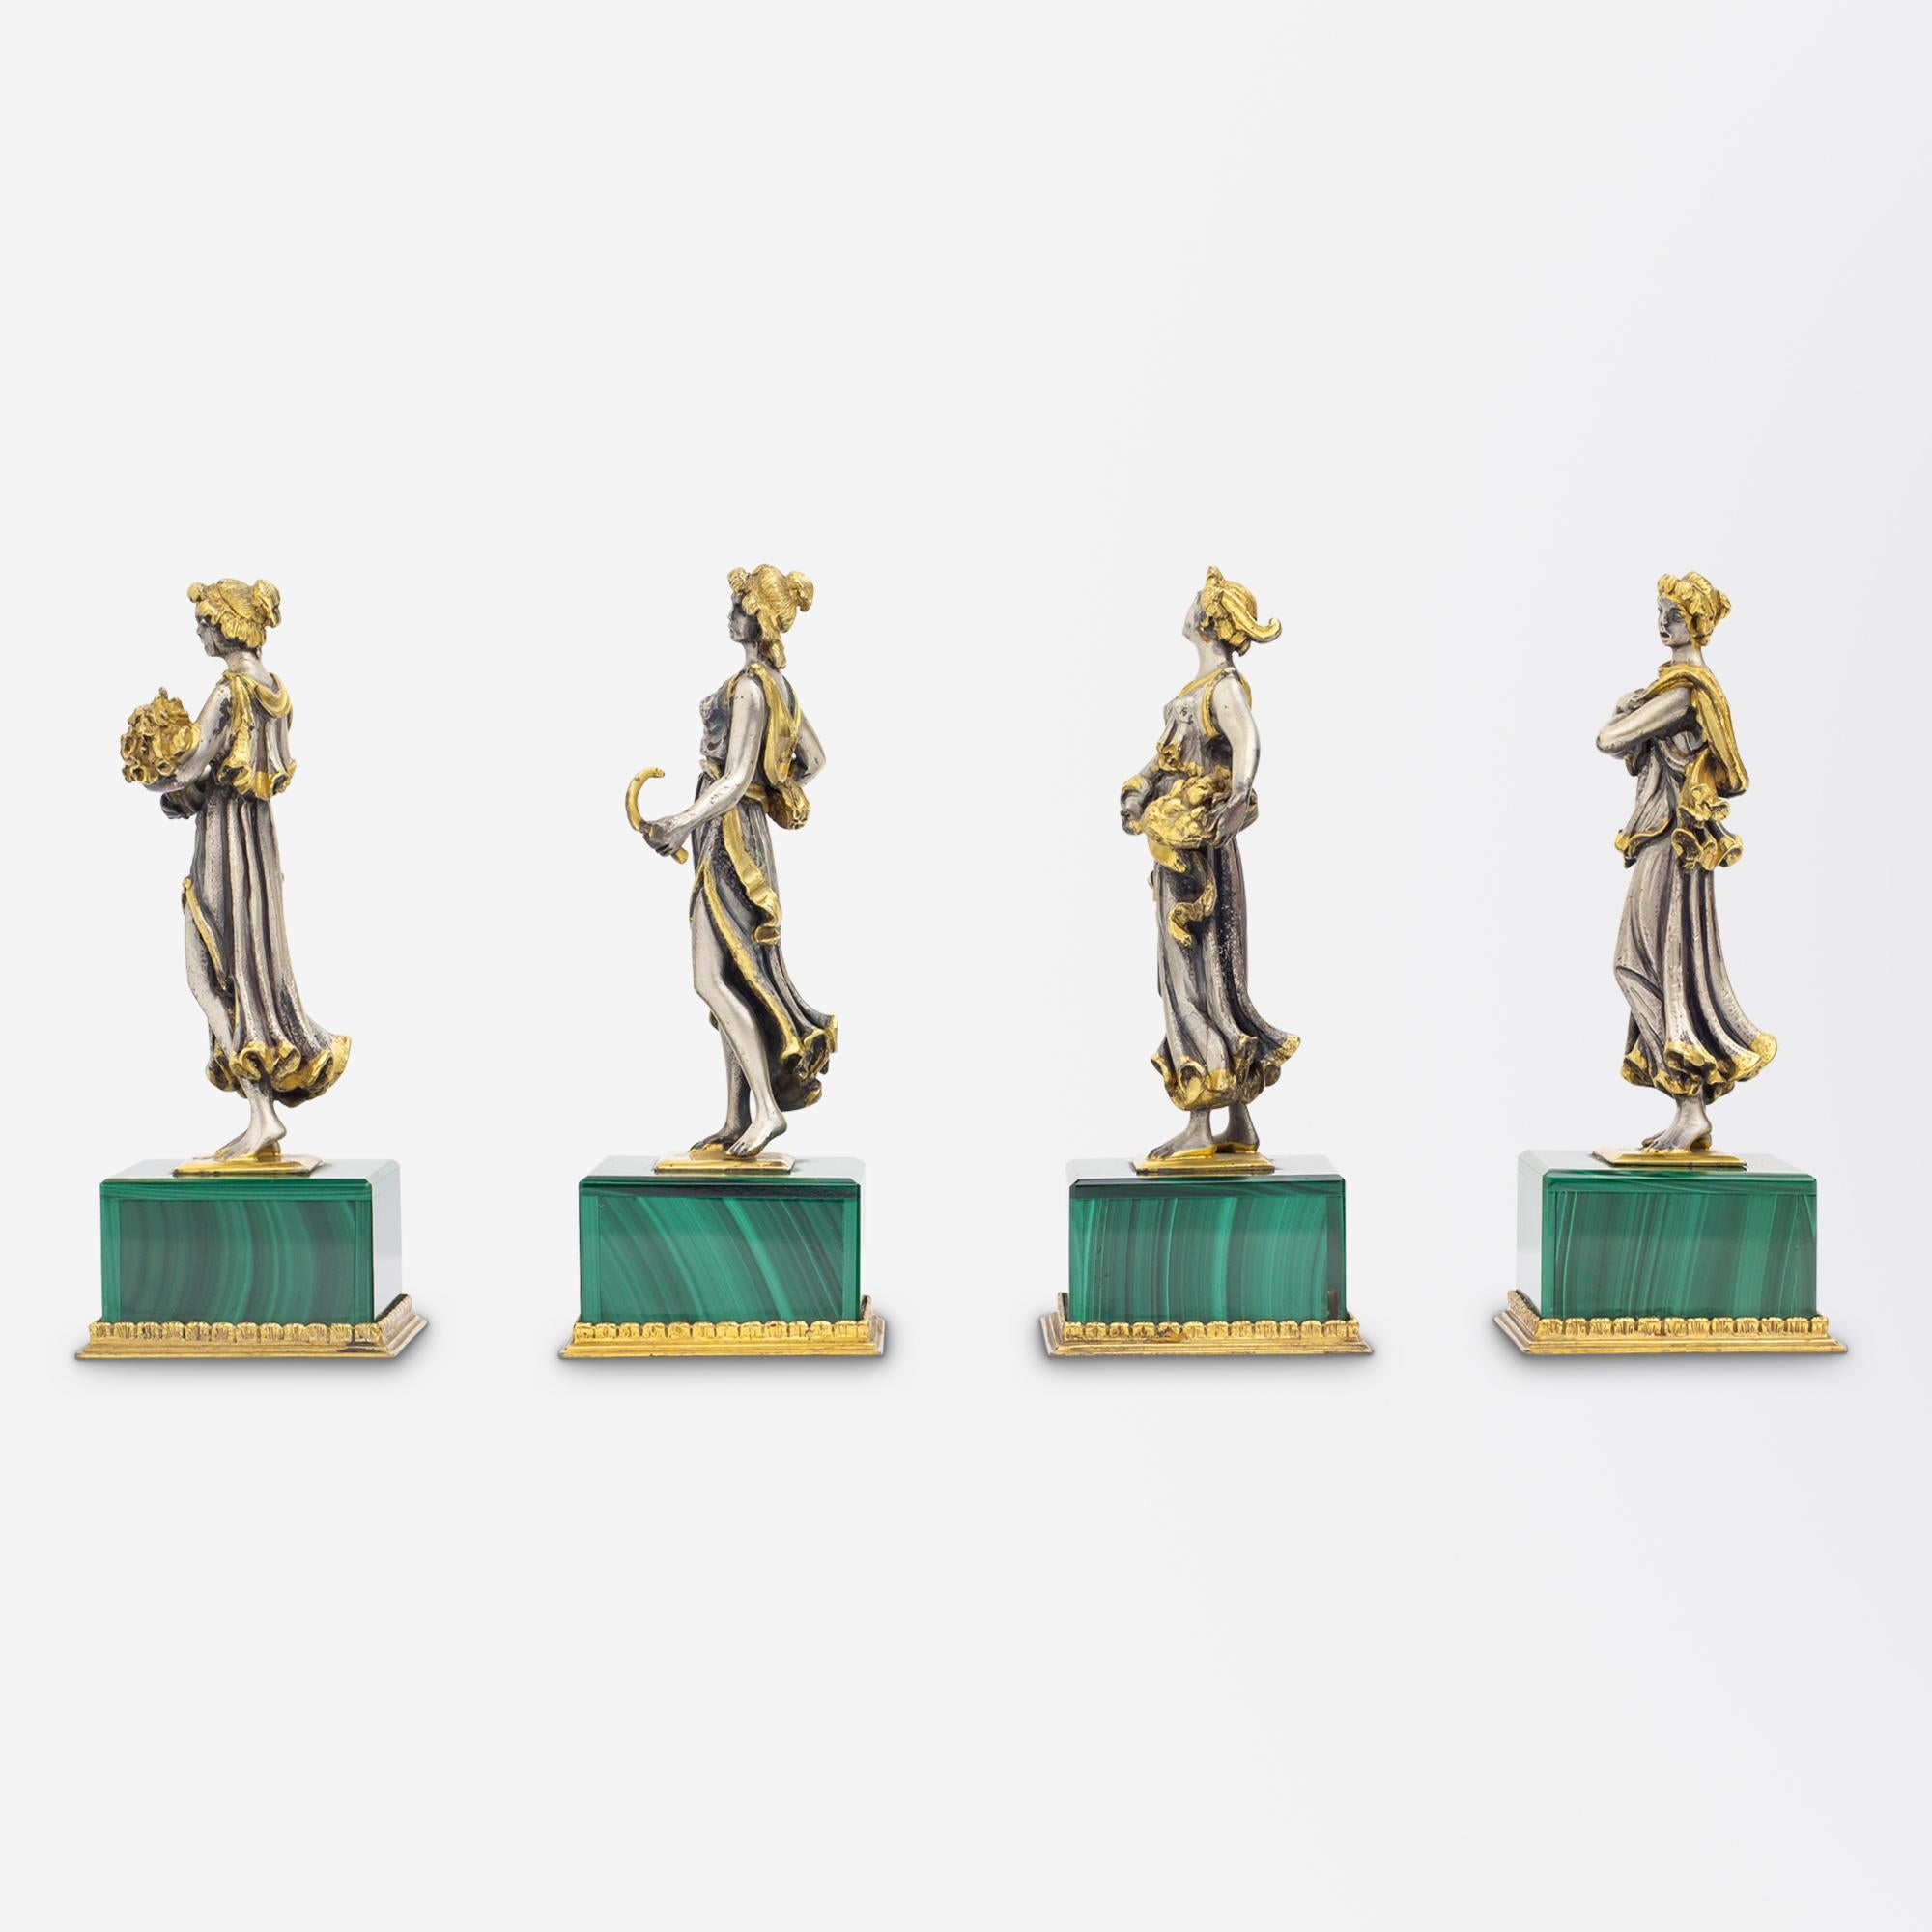 Uncut 'The Four Seasons' Figures in Gilt Silver & Malachite For Sale